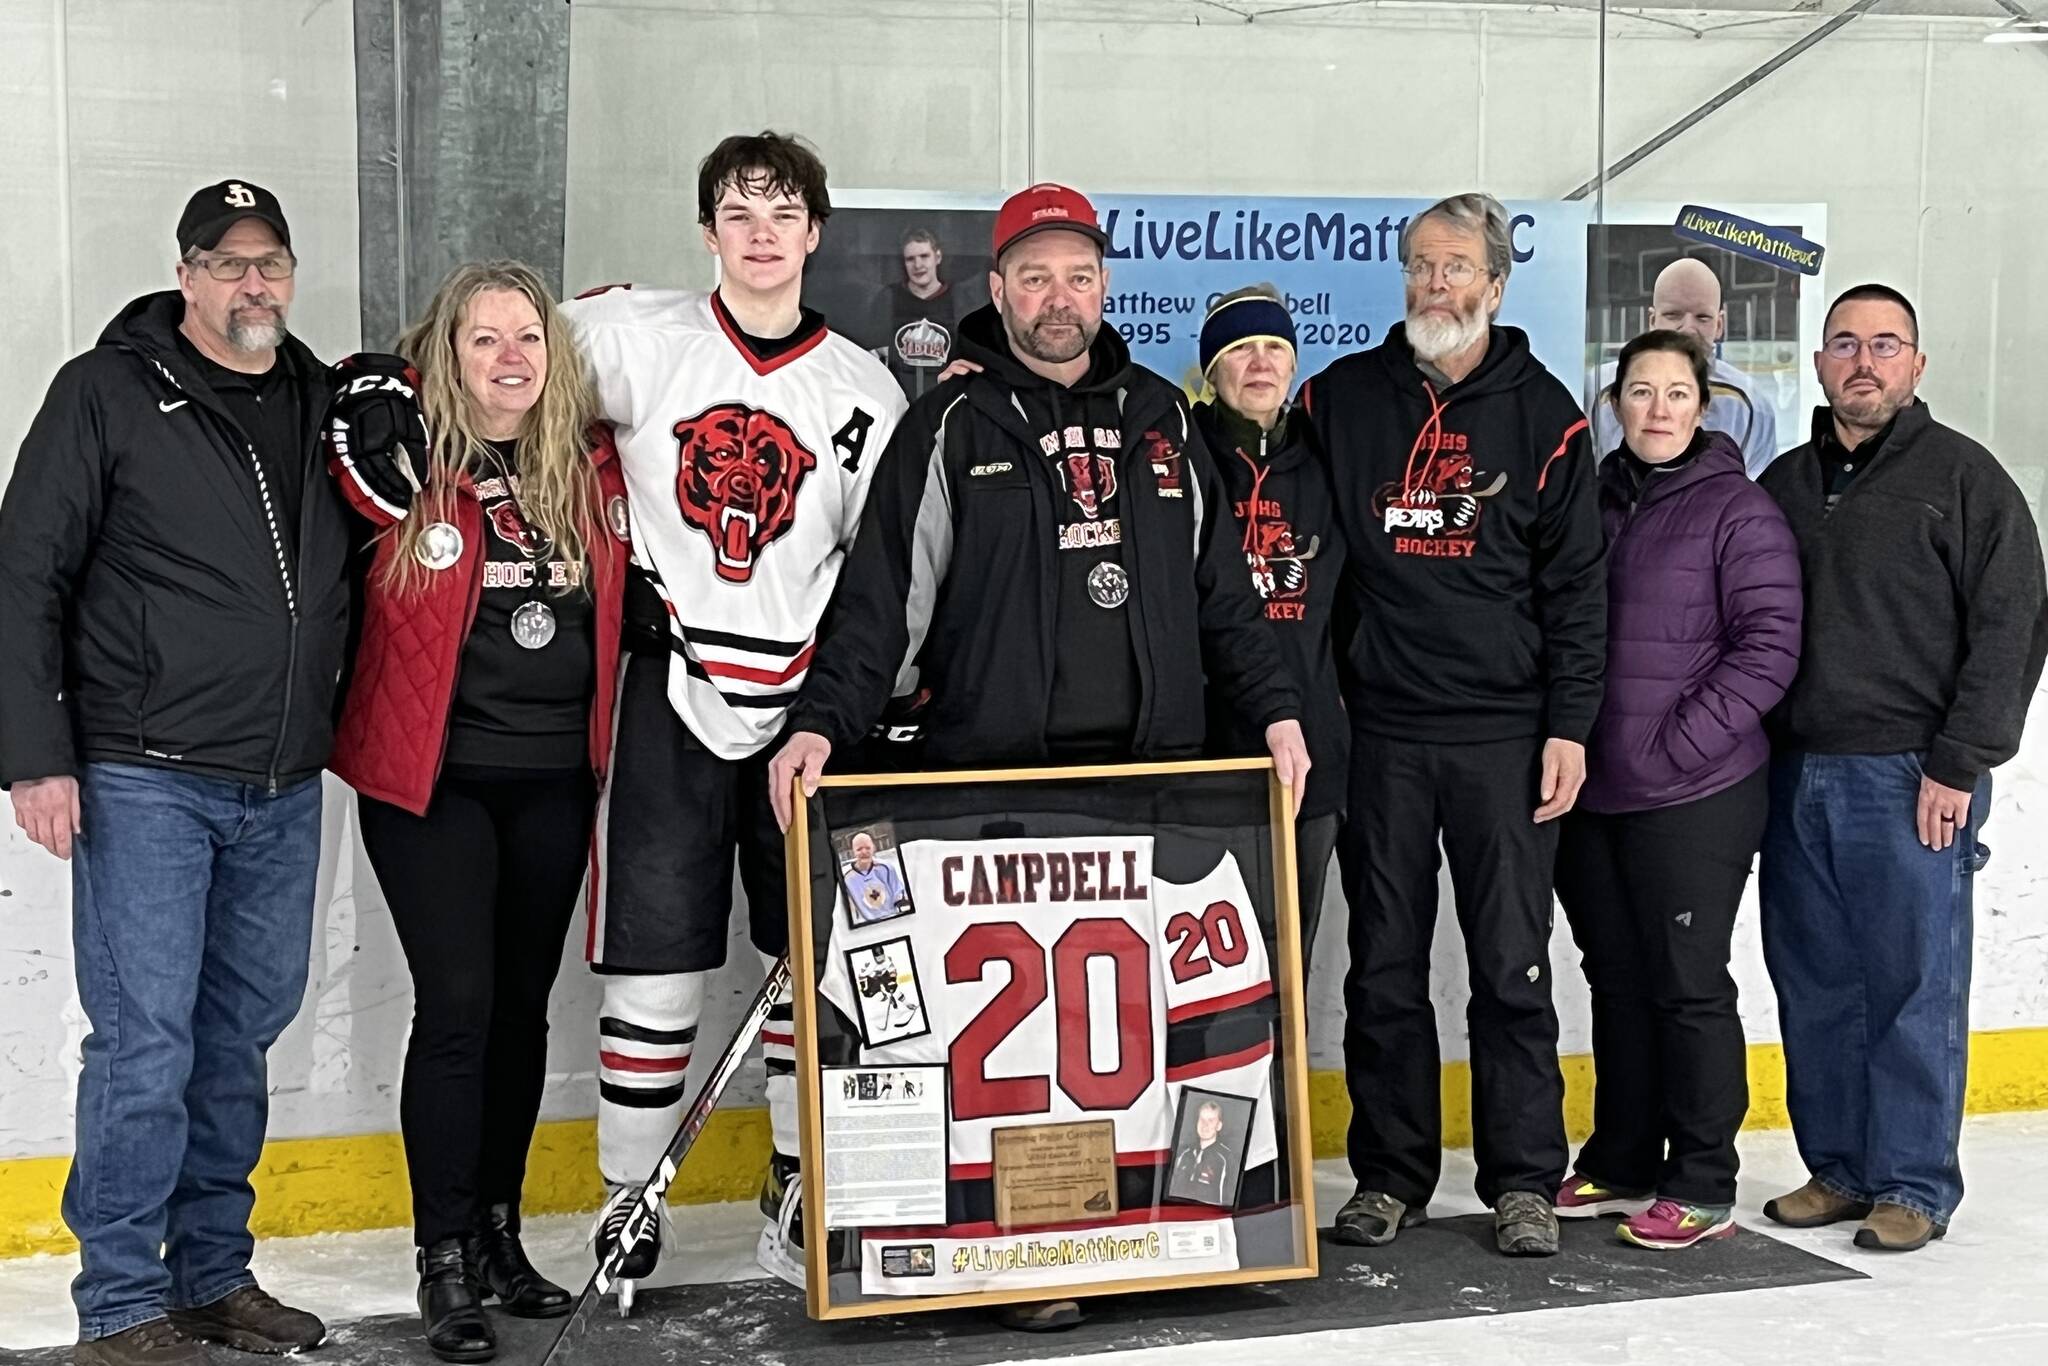 Photos by Jonson Kuhn / Juneau Empire
The Campbell family along with former JDHS hockey coach Jay Lloyd displays a framed jersey in honor of Matthew Campbell whose number was retired during a special ceremony on Saturday at Treadwell Arena.